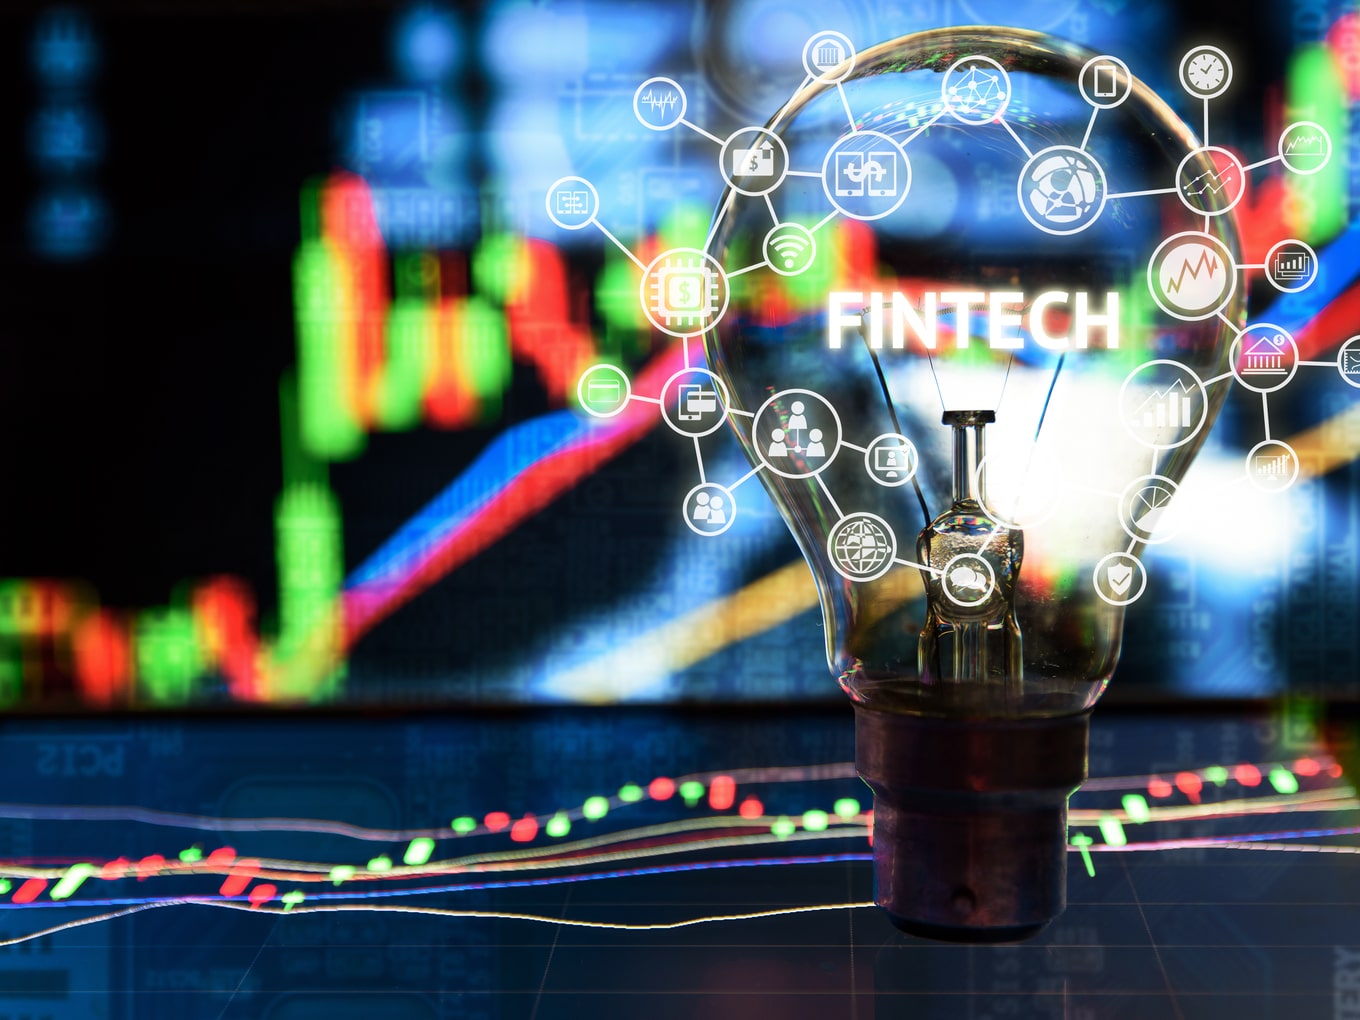 FinTech is Empowering But Has Its Own Set of Challenges